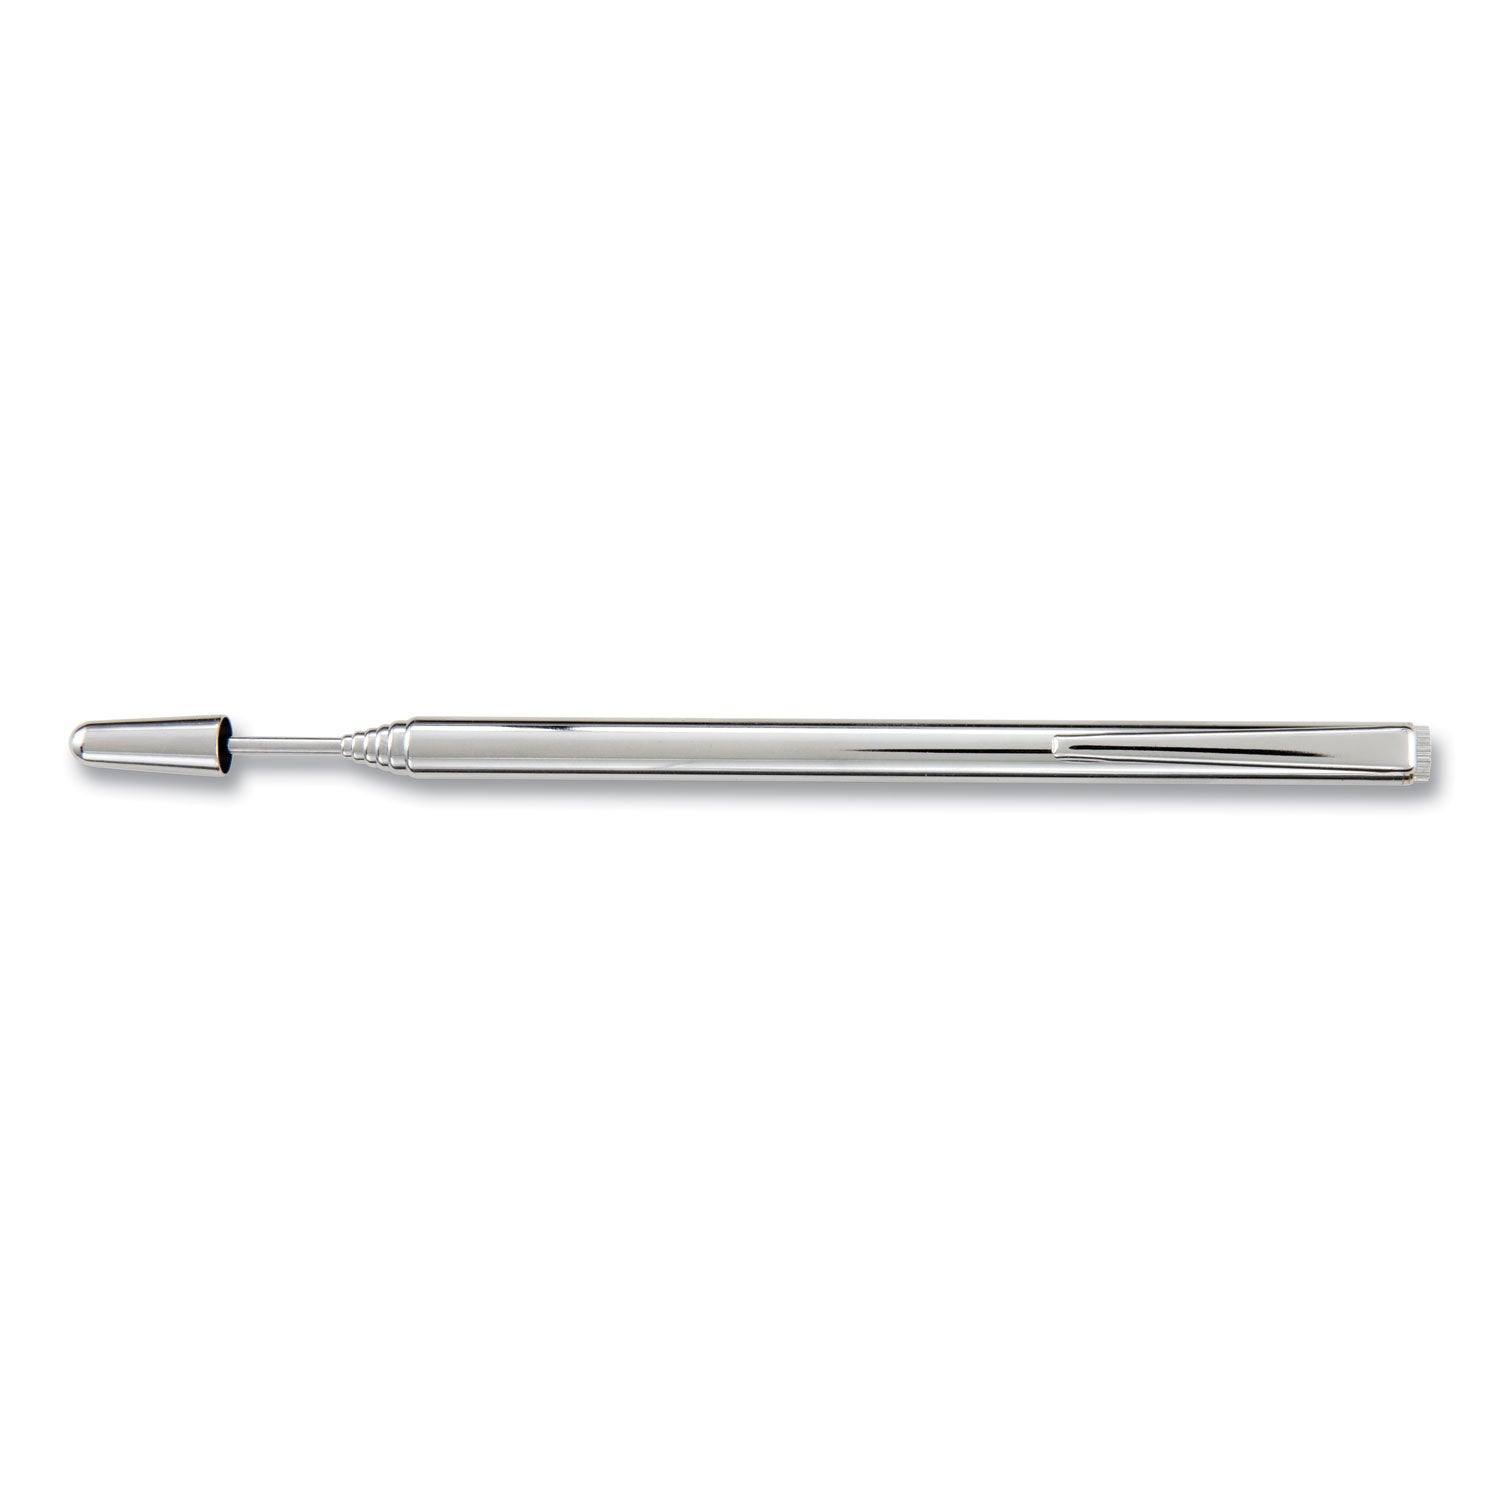 Slimline Pen-Size Pocket Pointer with Clip, Extends to 24.5", Silver - 